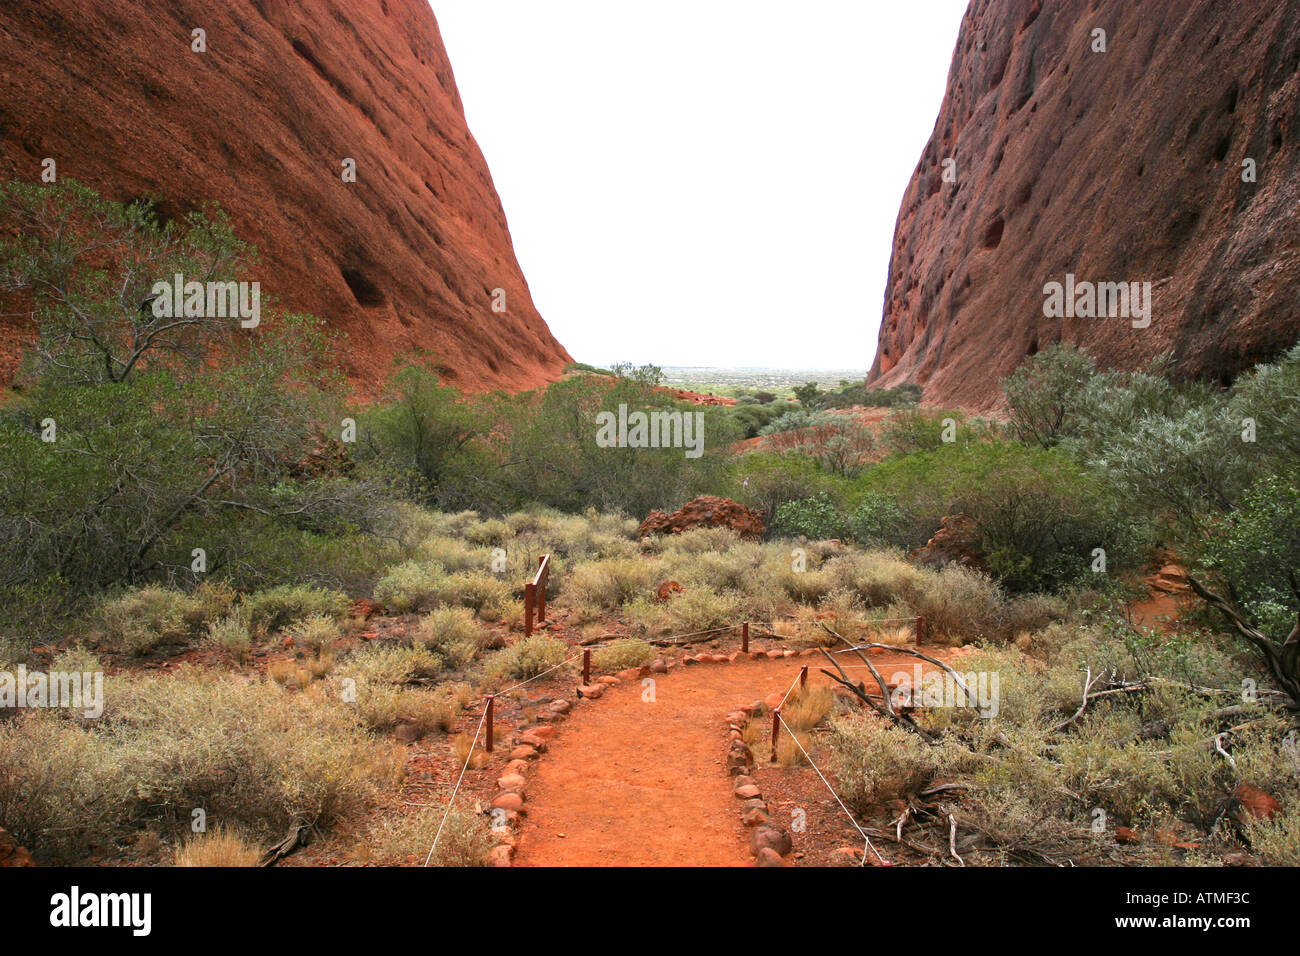 The main hiking path cuts through the giant red sandstone domes of the Olgas northern territory Australia Stock Photo